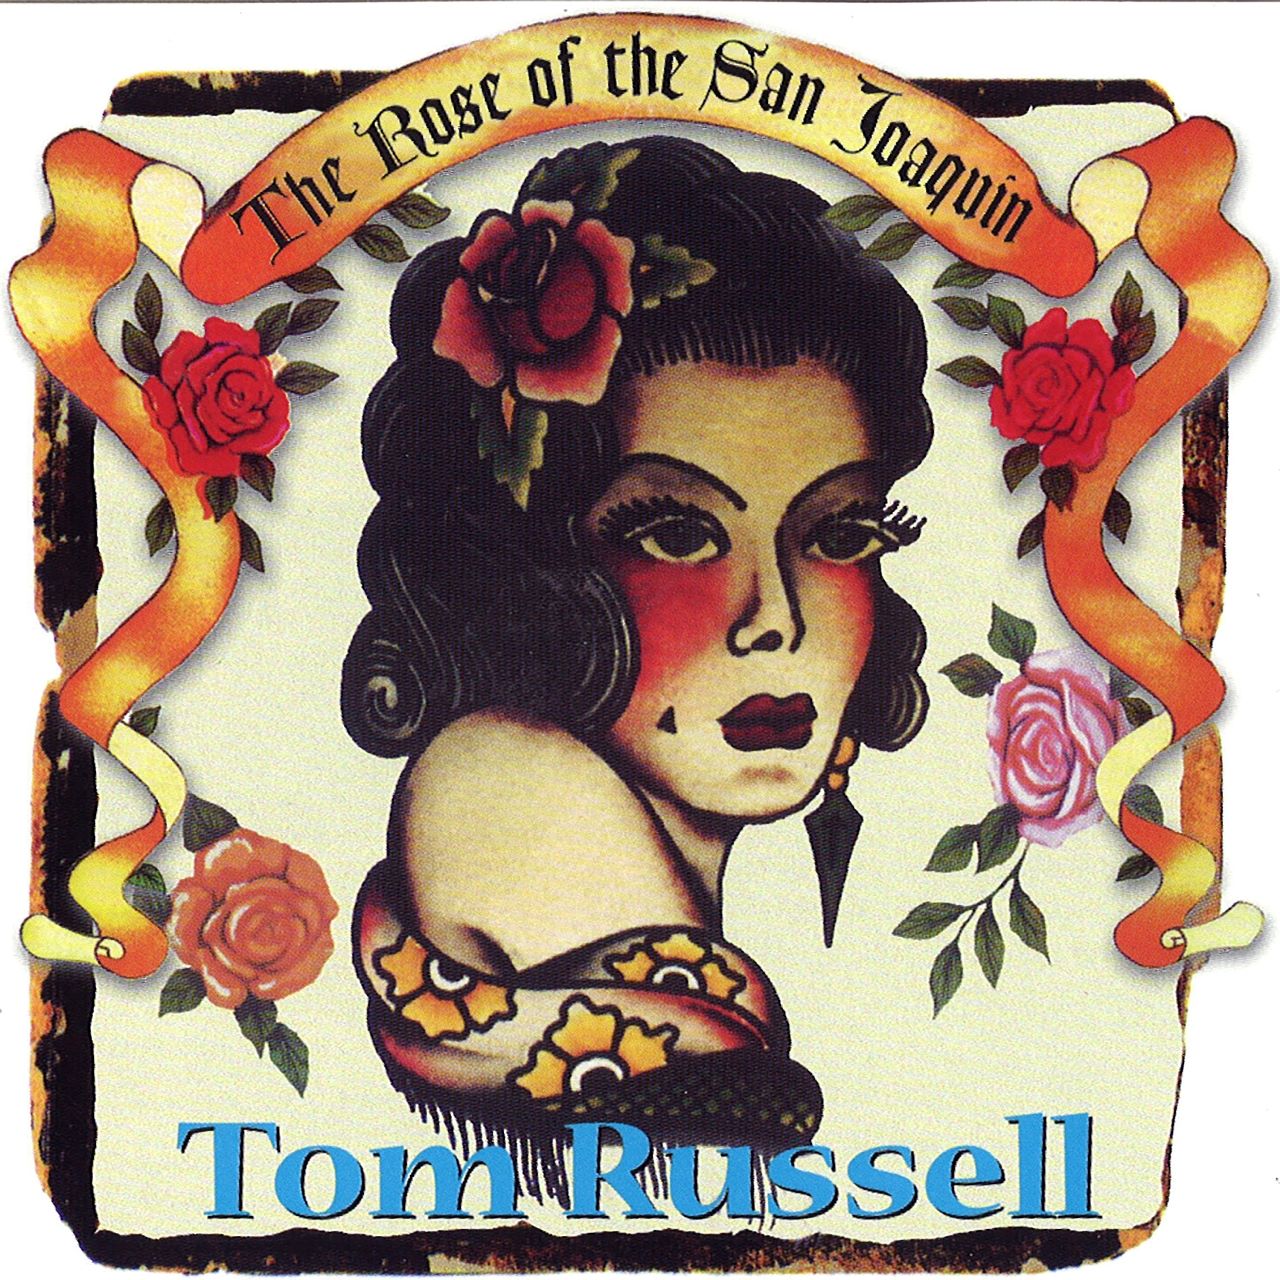 Tom Russell - The Rose Of The San Joaquin cover album